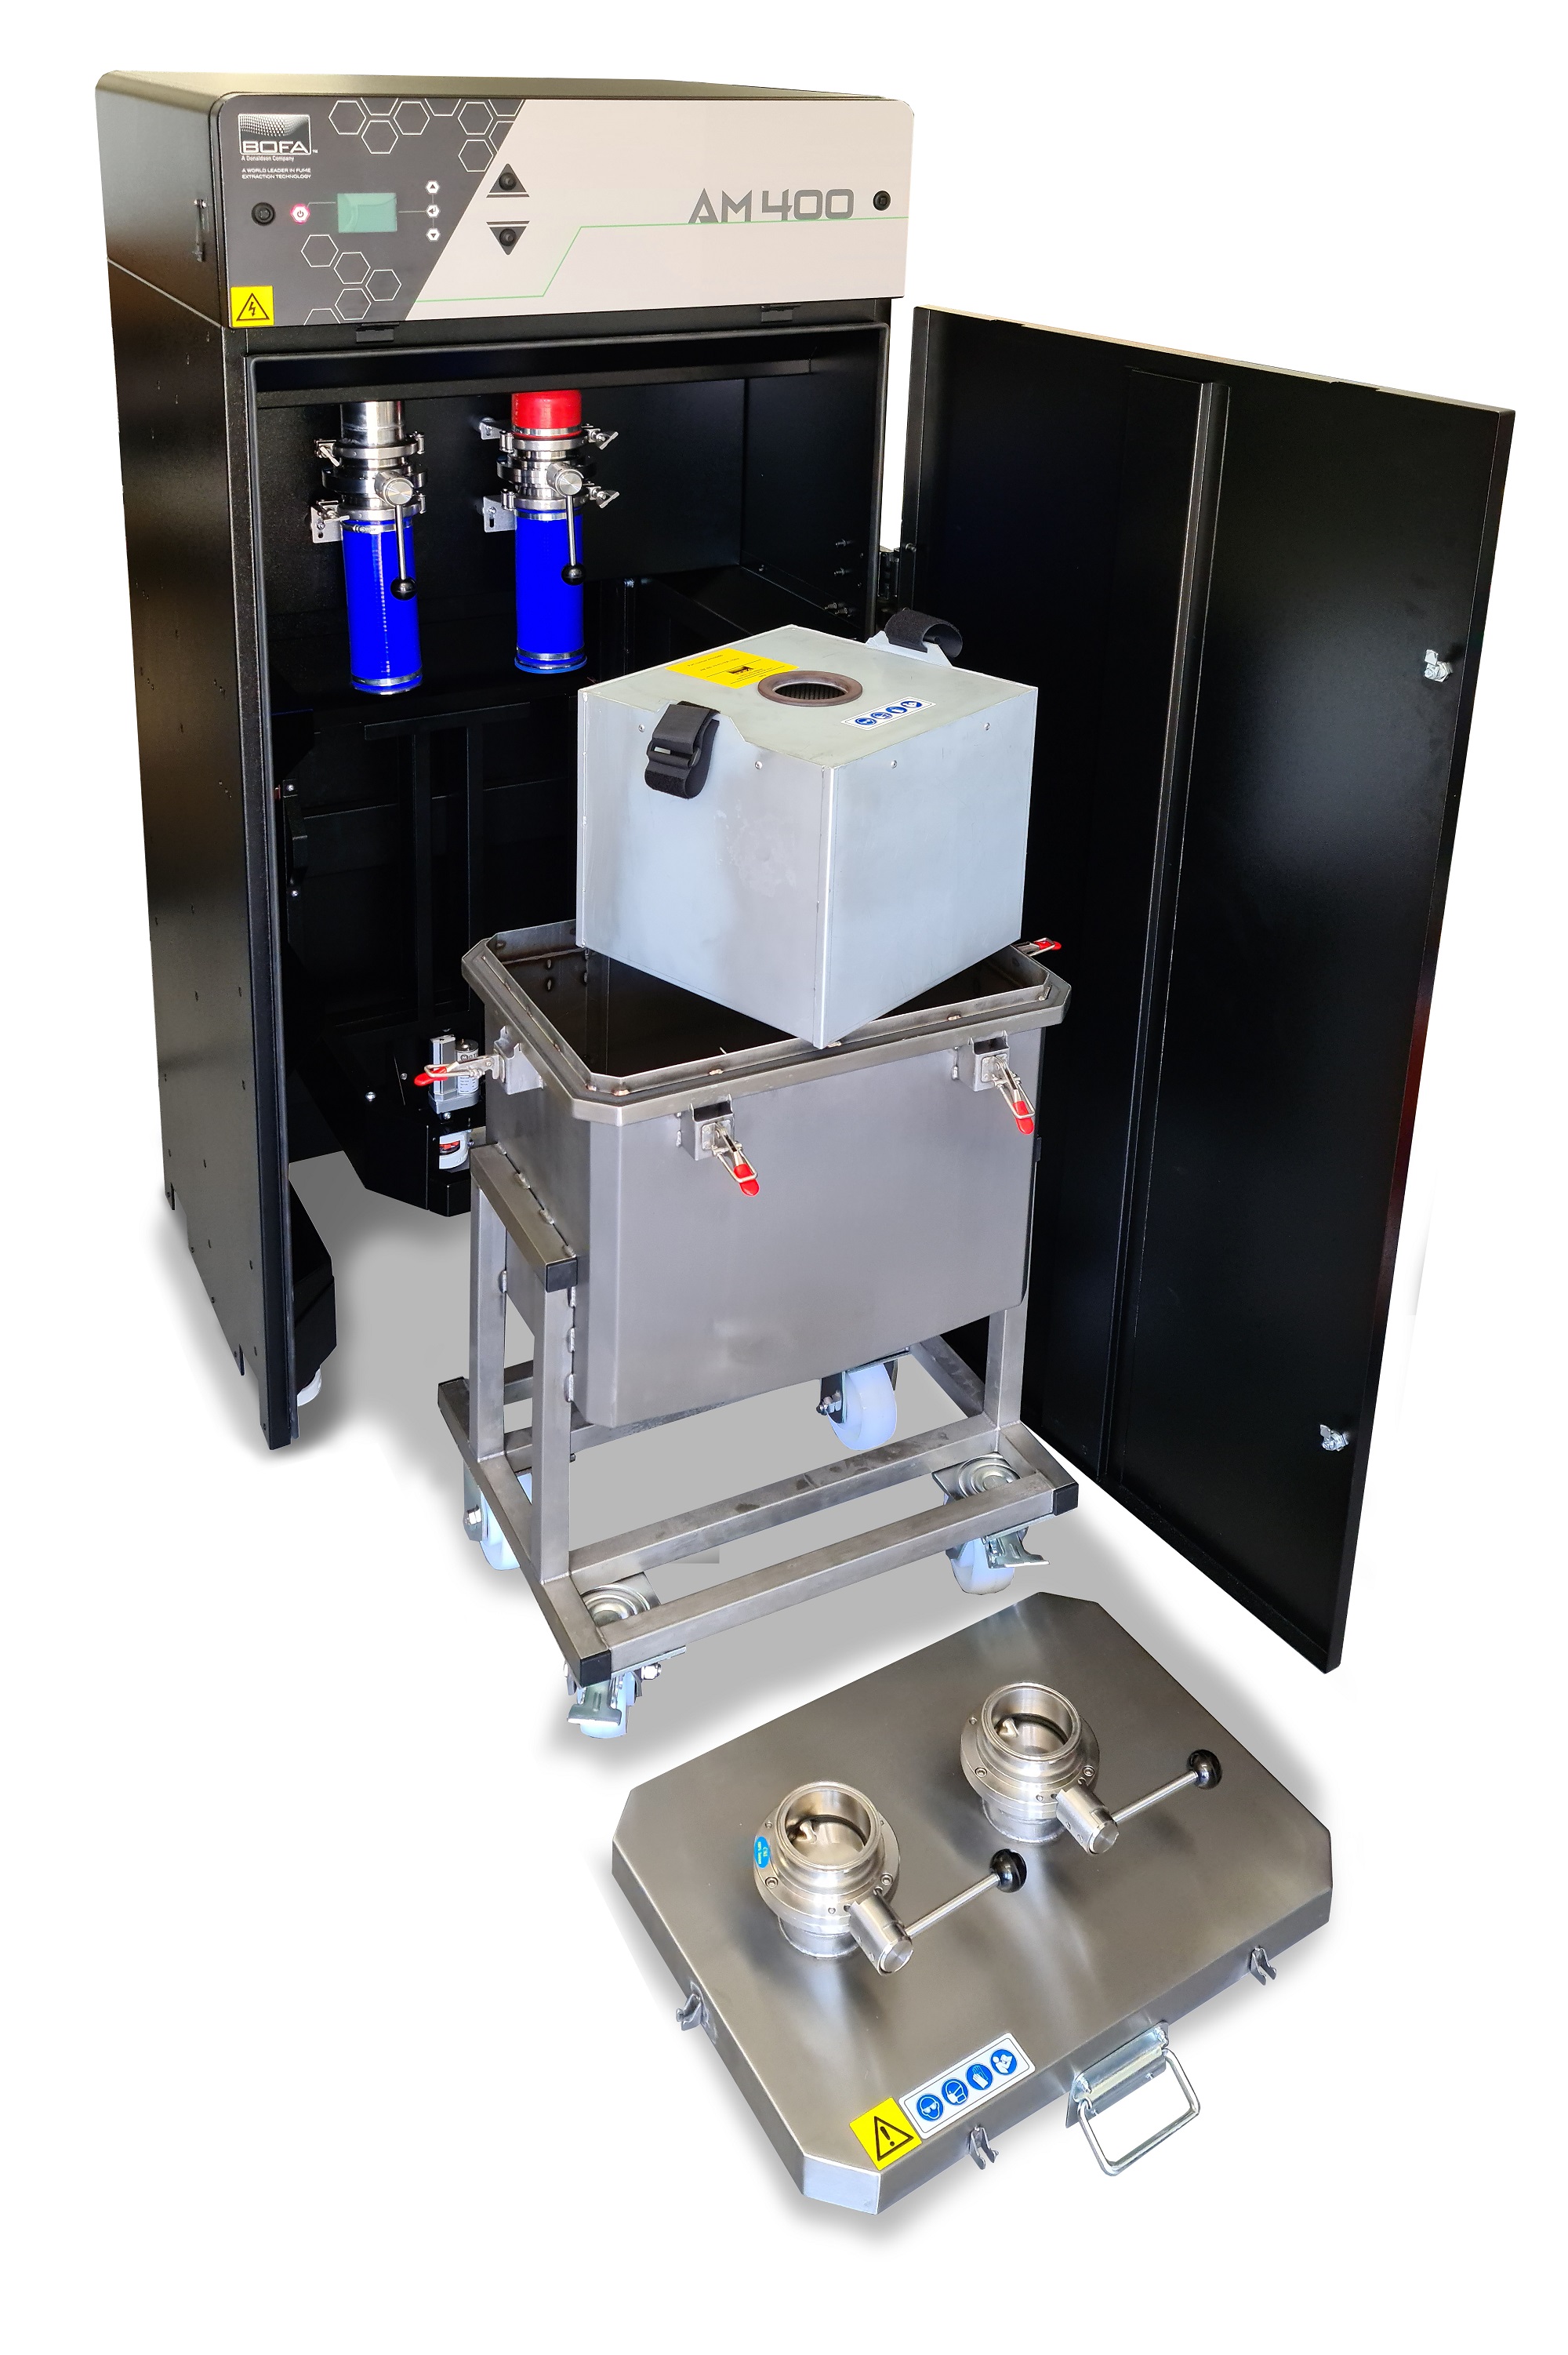 Filters are contained within a separate housing with a robust seal, enabling filter exchange to be completed quickly and safely without isolating the additive manufacturing equipment.